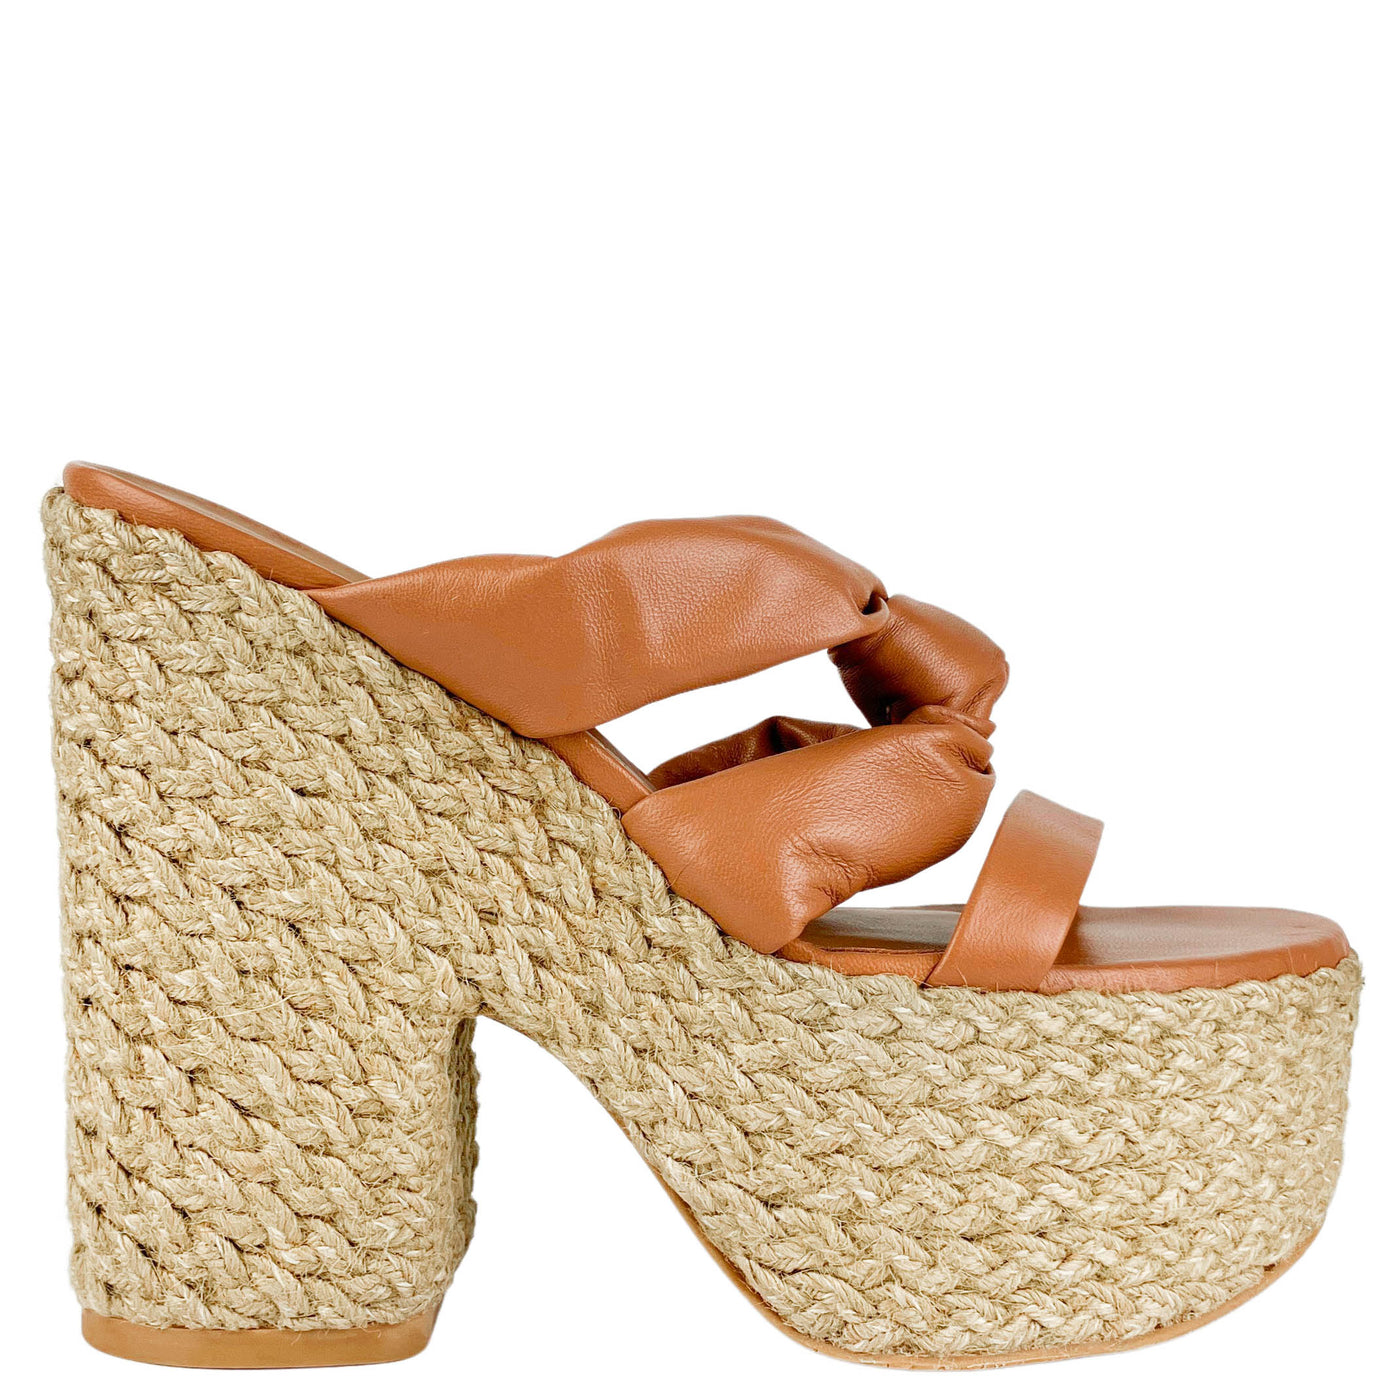 Stuart Weitzman Leather Knotted Platform Sandals in Tan - Discounts on Stuart Weitzman at UAL